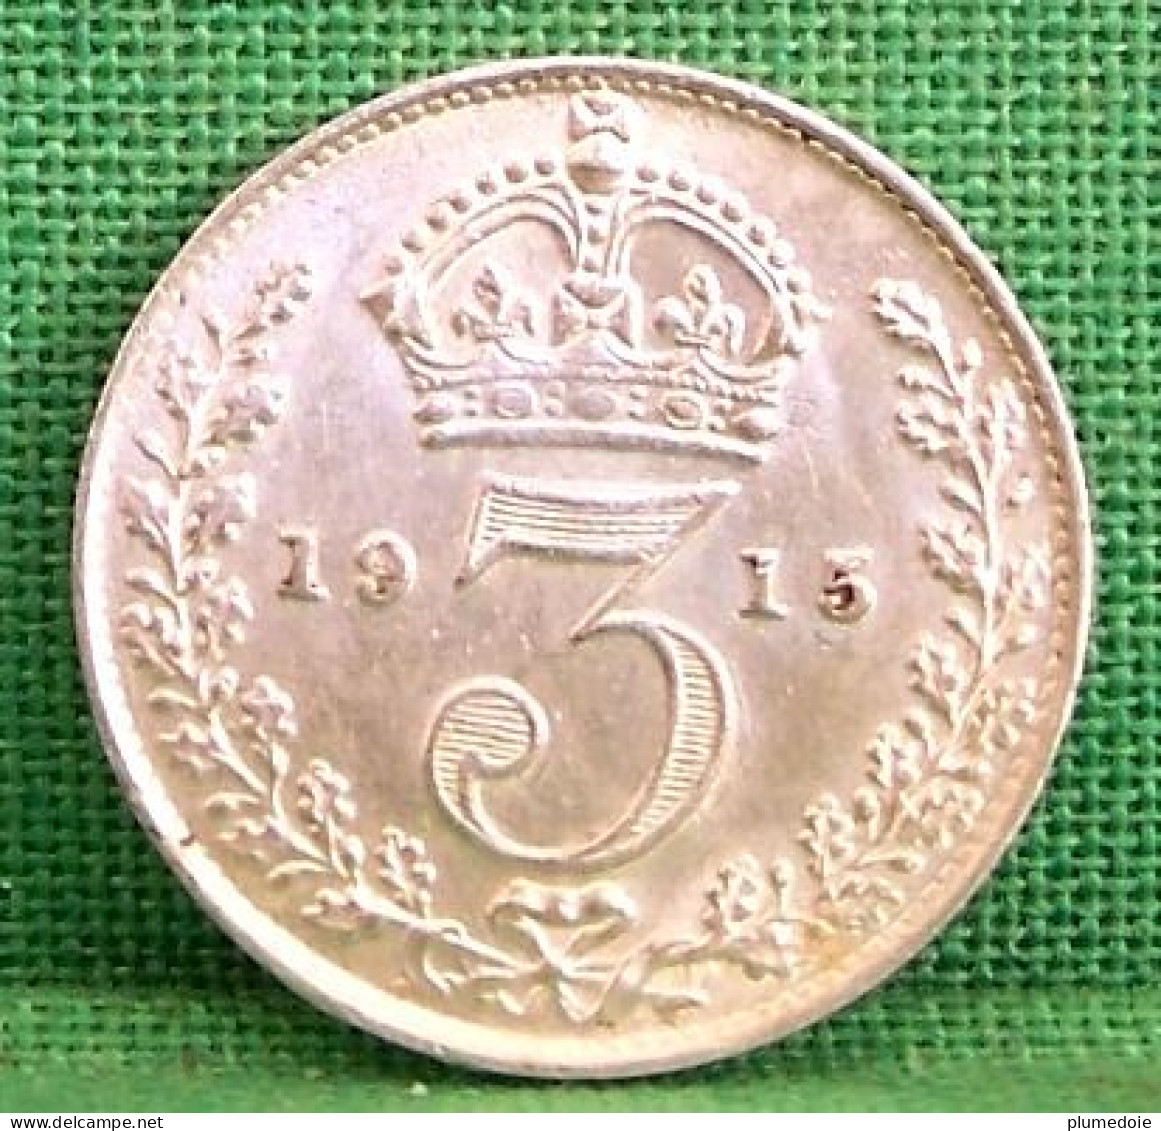 MONNAIE ARGENT  3 PENCE 1915 GEORGES V GRANDE BRETAGNE / GREAT BRITAIN SILVER COIN - F. 3 Pence